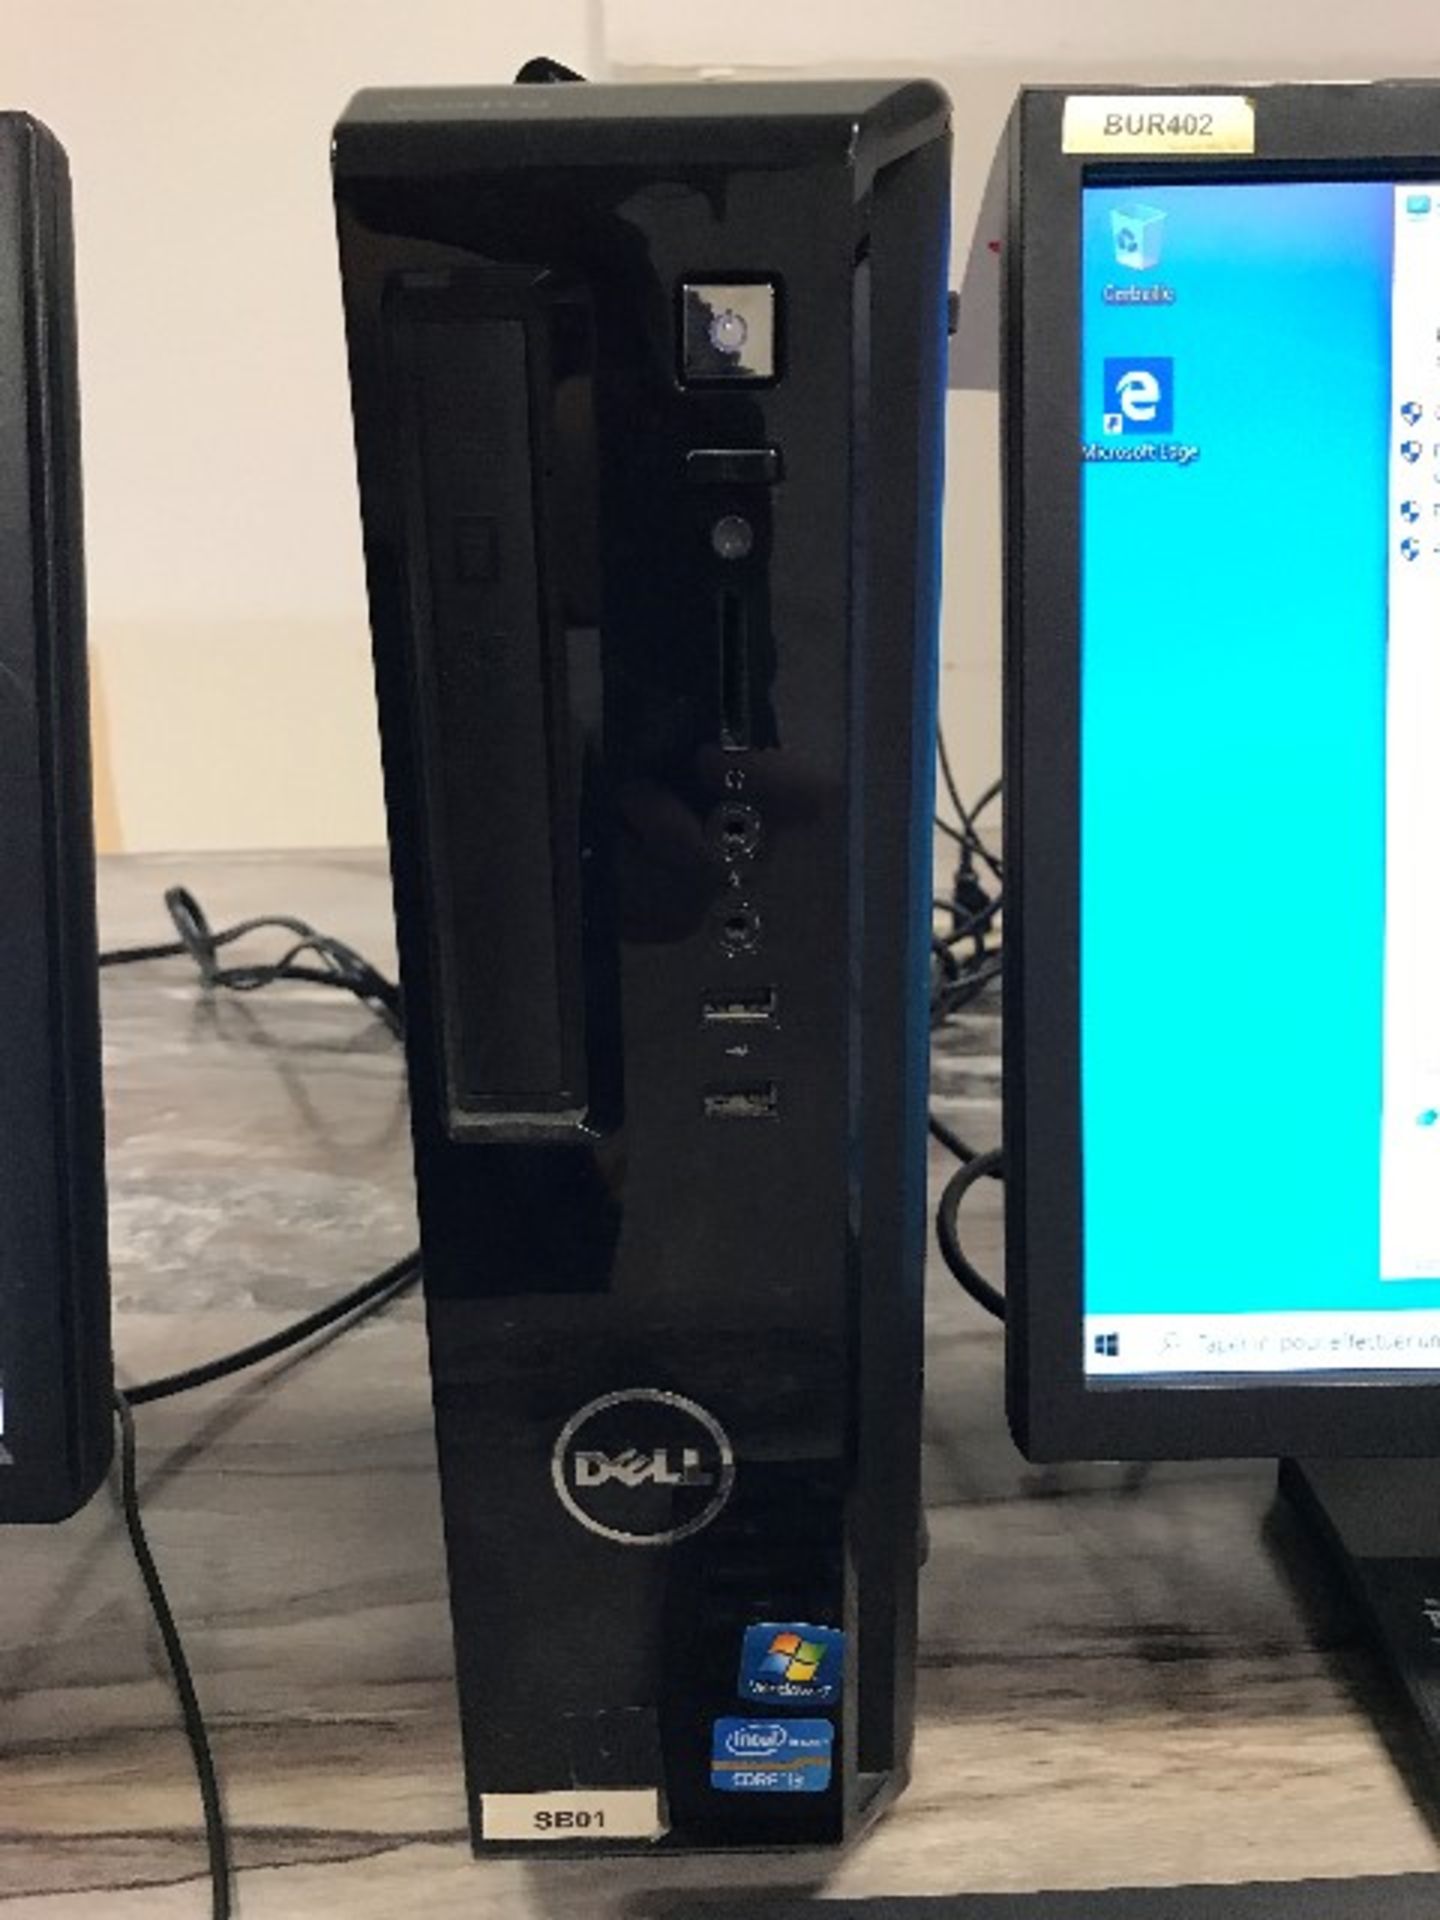 Dell i3,3.3GHz,2GB RAM,75GB HDD,monitor,keyboard,mouse - Image 2 of 3